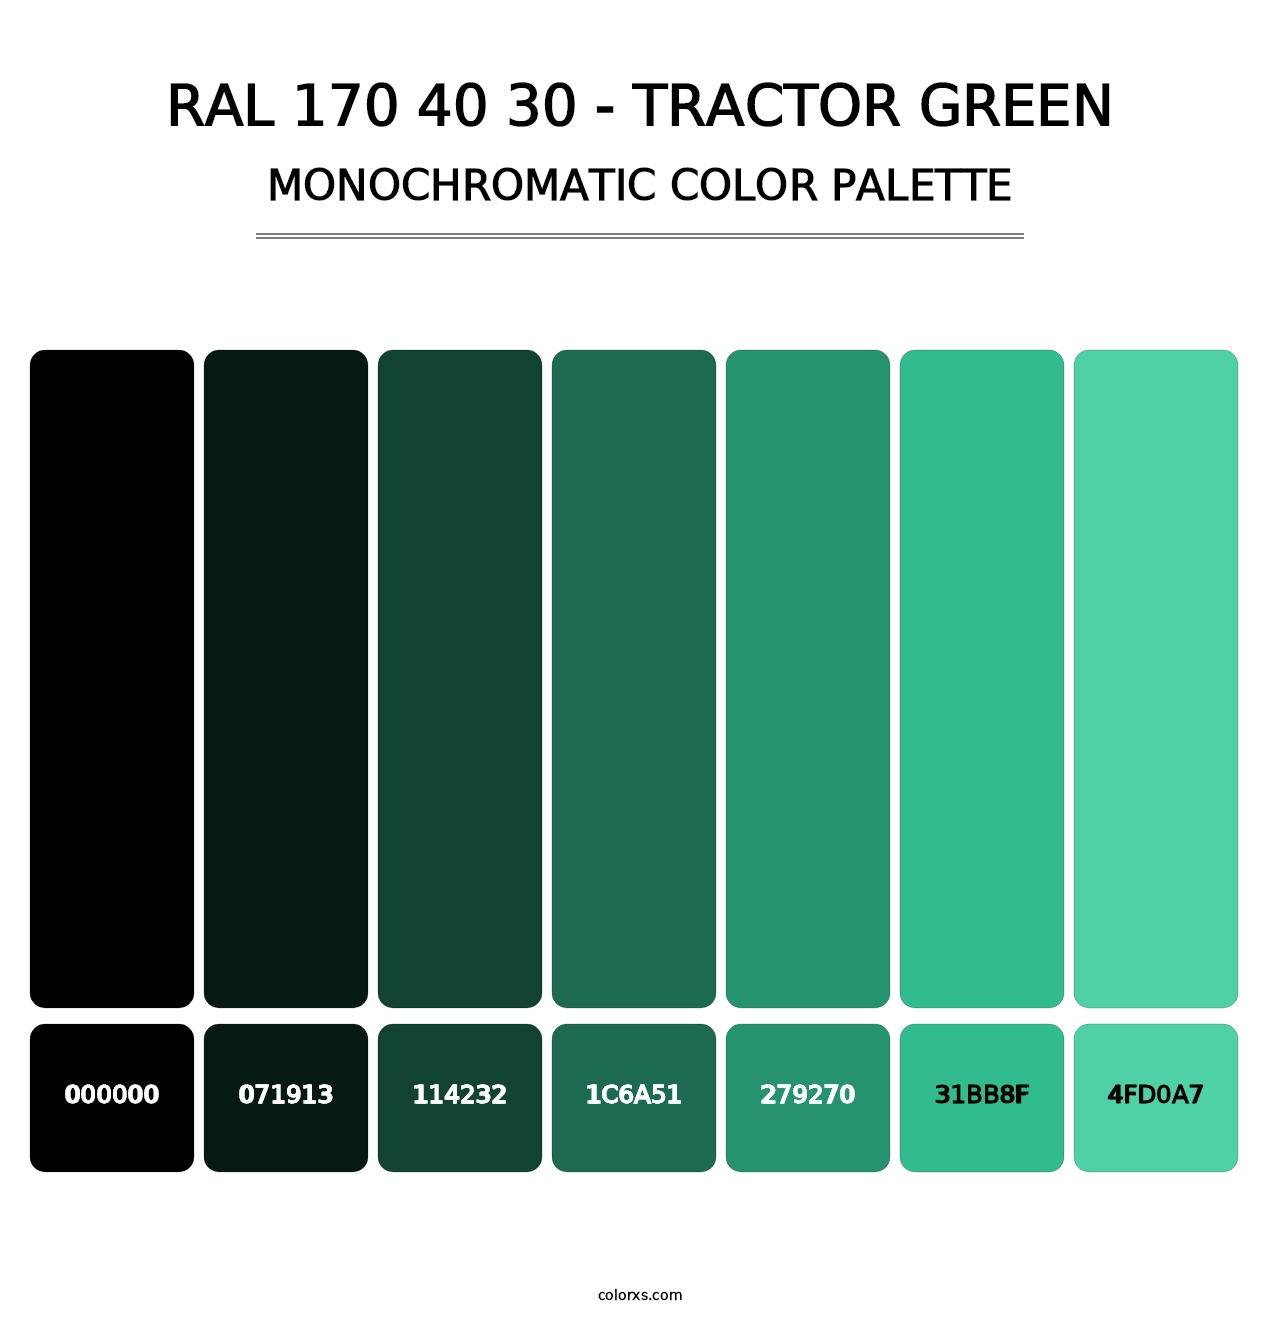 RAL 170 40 30 - Tractor Green - Monochromatic Color Palette